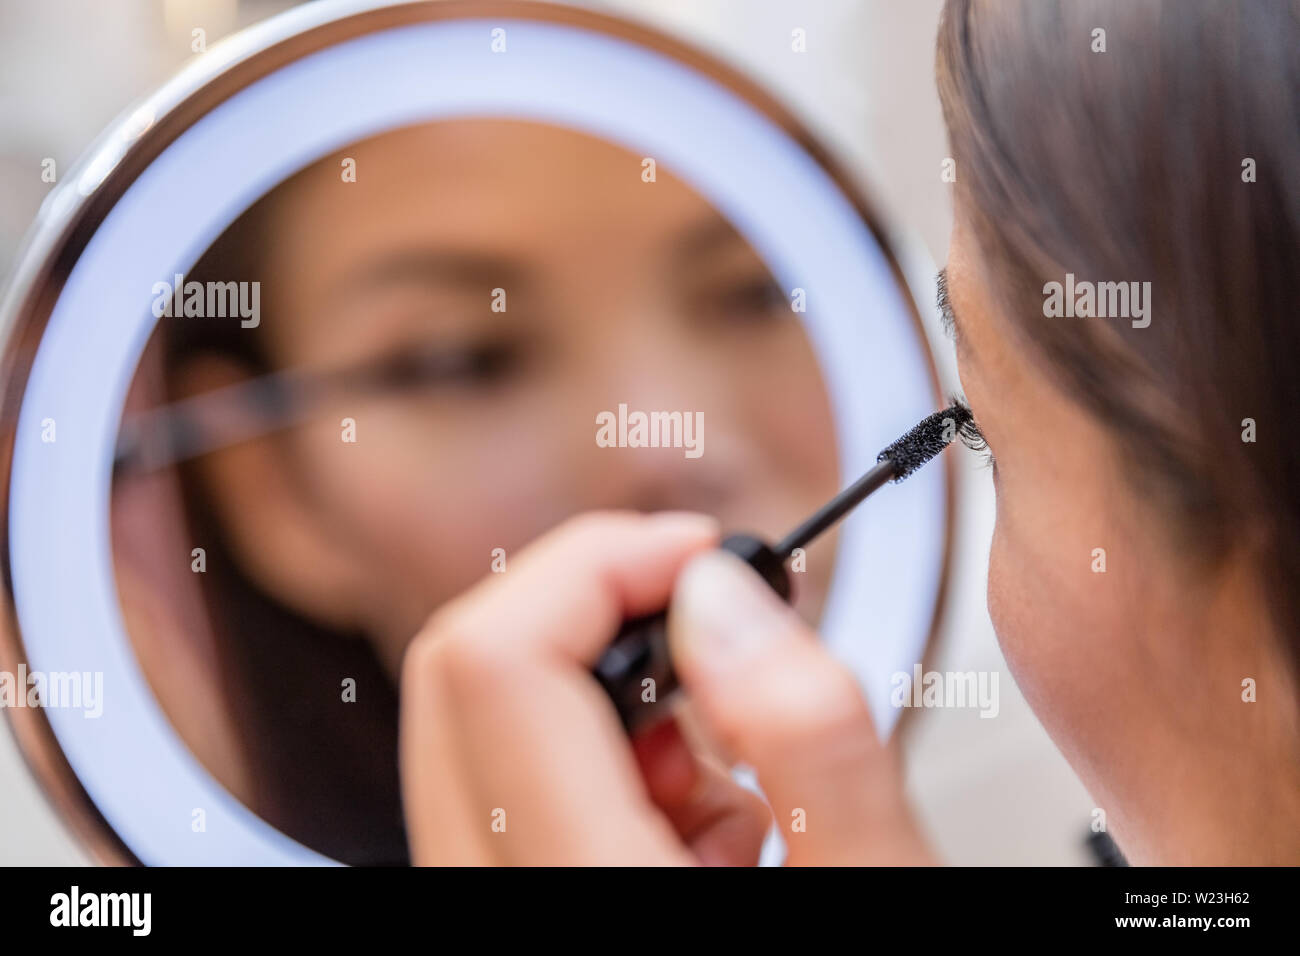 Woman putting mascara in lighted round makeup mirror from luxury hotel or home bathroom. Beautiful Asian girl getting ready for a night out applying eye make-up with brush looking at reflection. Stock Photo